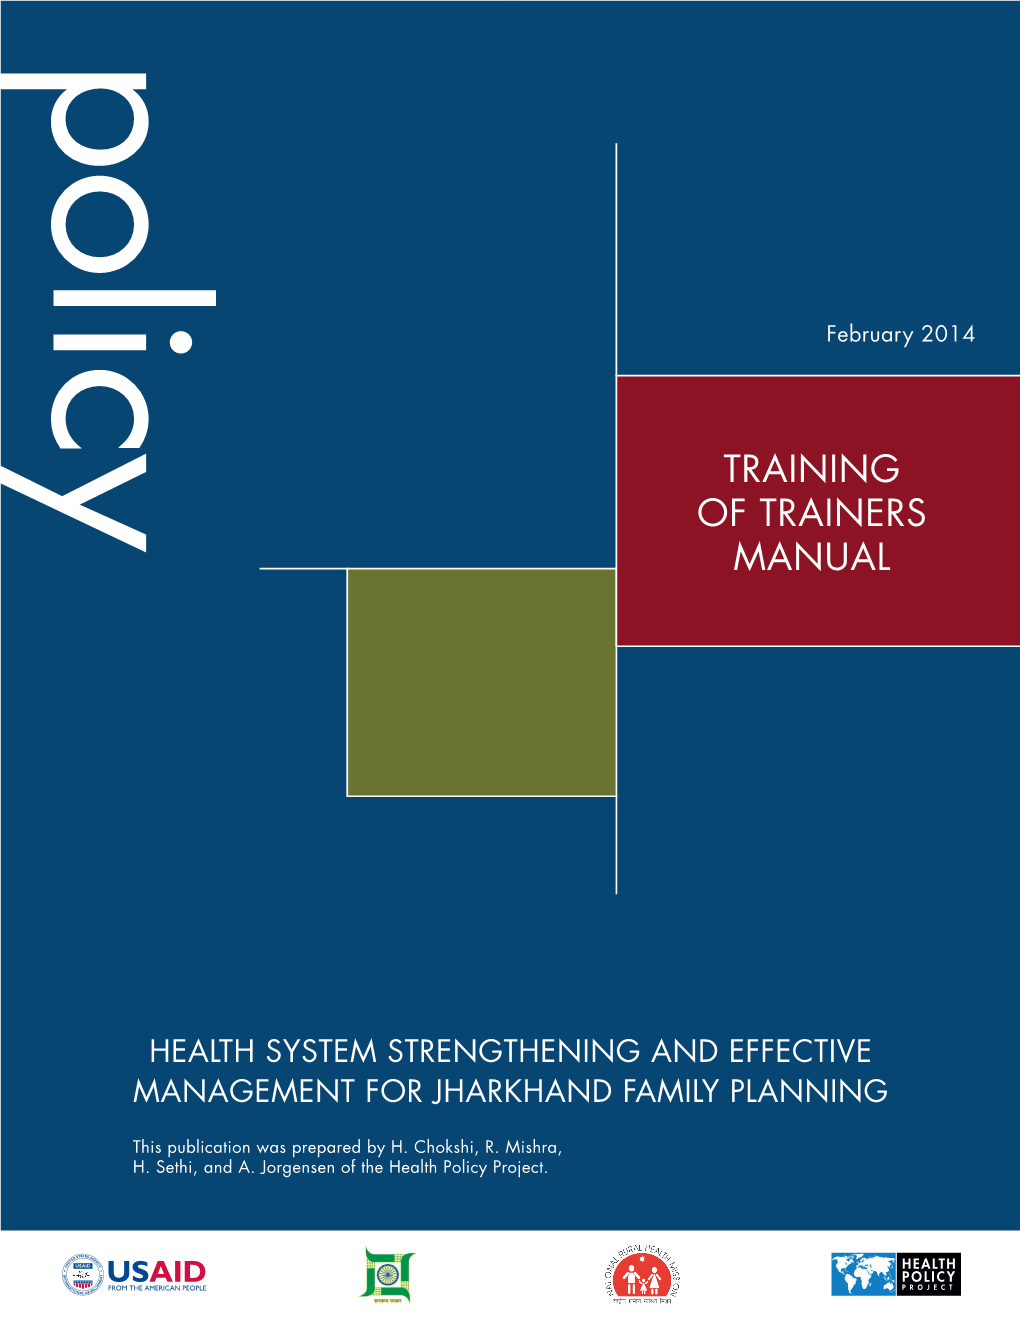 Training of Trainers Manual